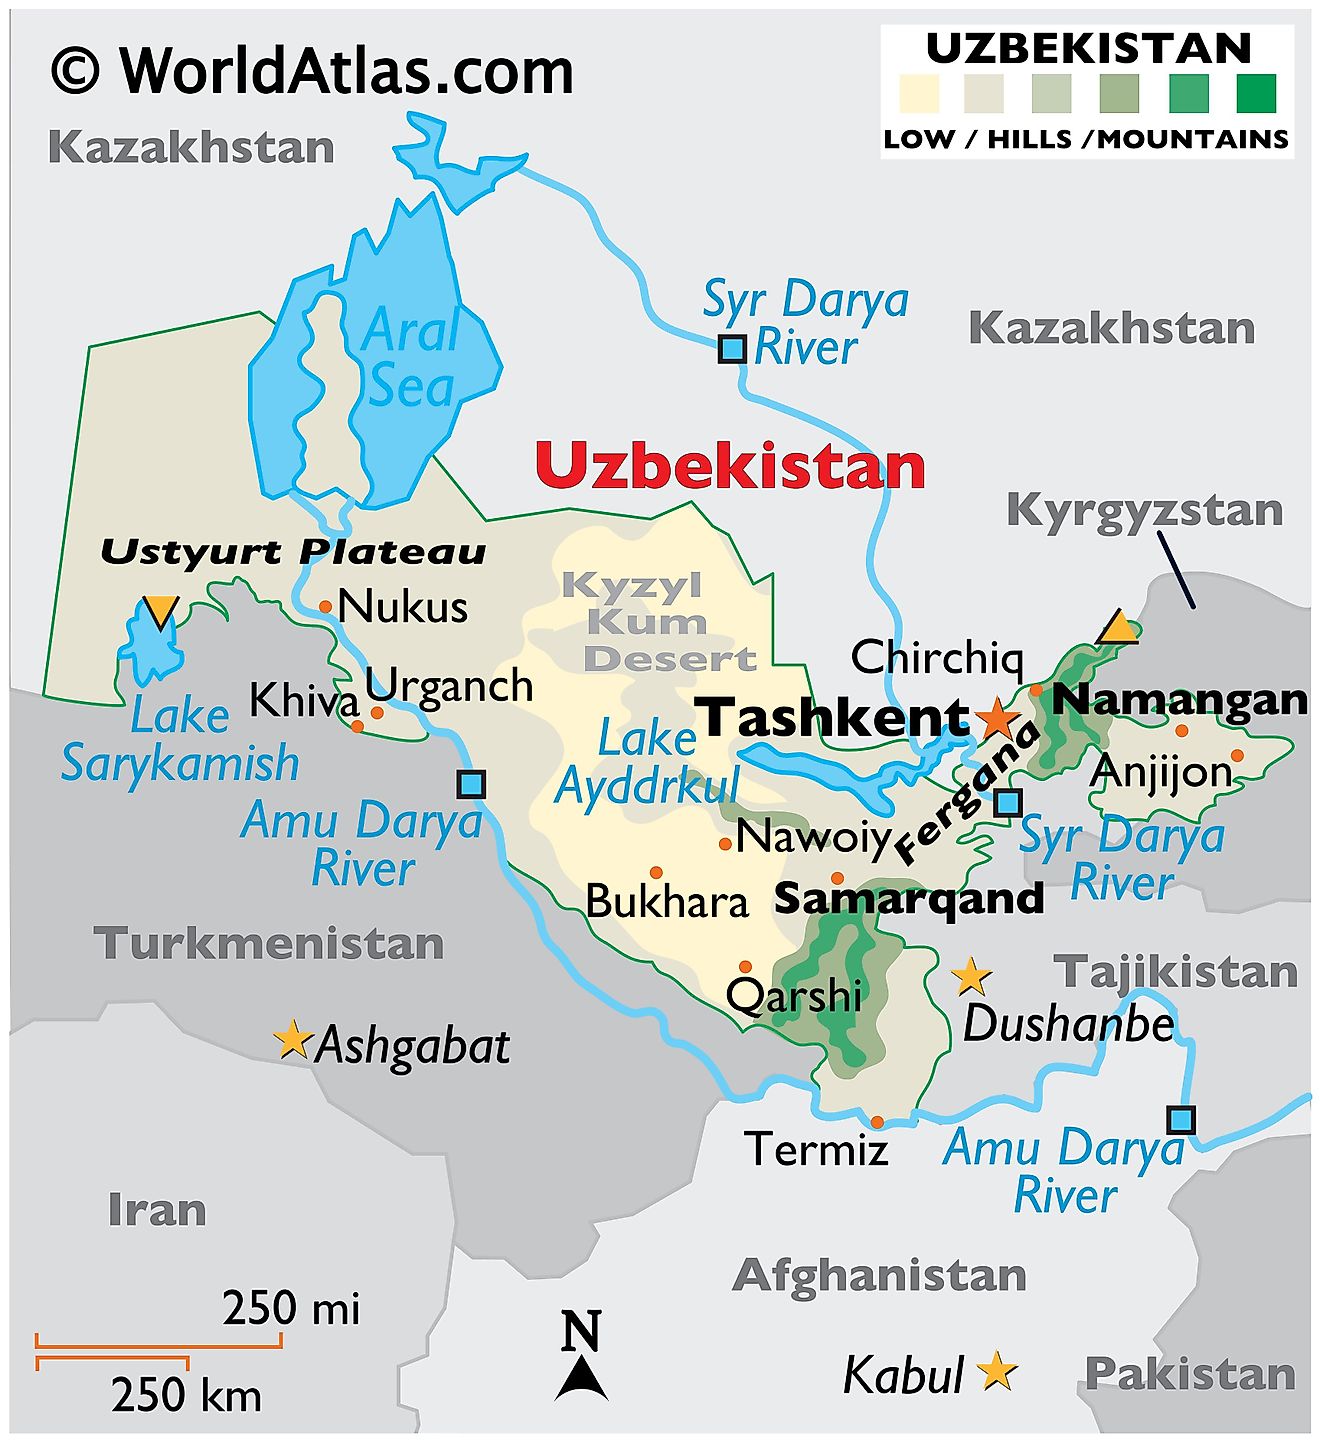 Physical Map of Uzbekistan with state boundaries, relief, major rivers, lakes, highland areas, highest peak, important cities, and more.